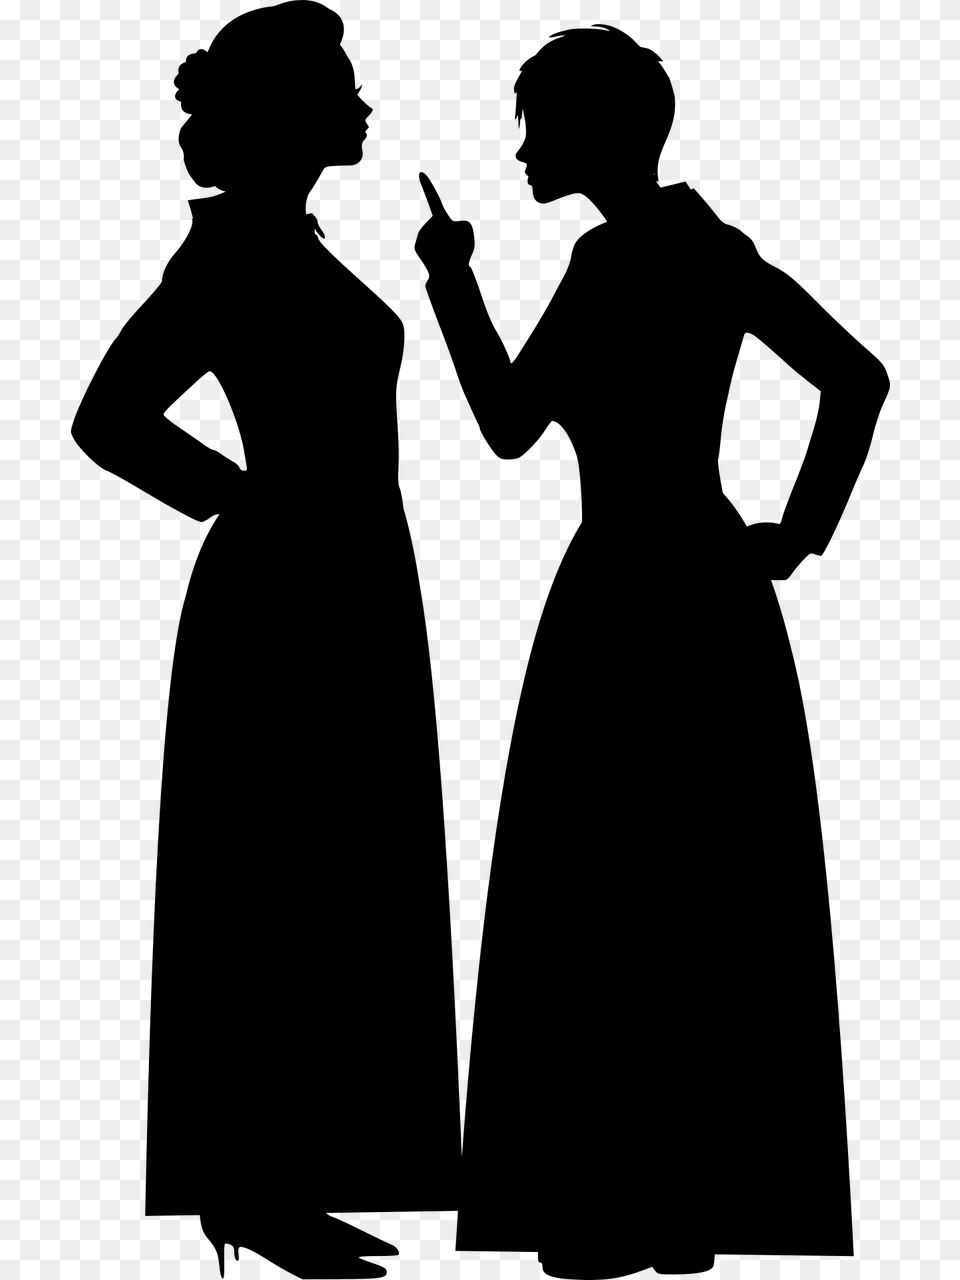 Angry Woman Conflict Yell Silhouette Communication Silhouette Of Angry Women, Gray Free Png Download